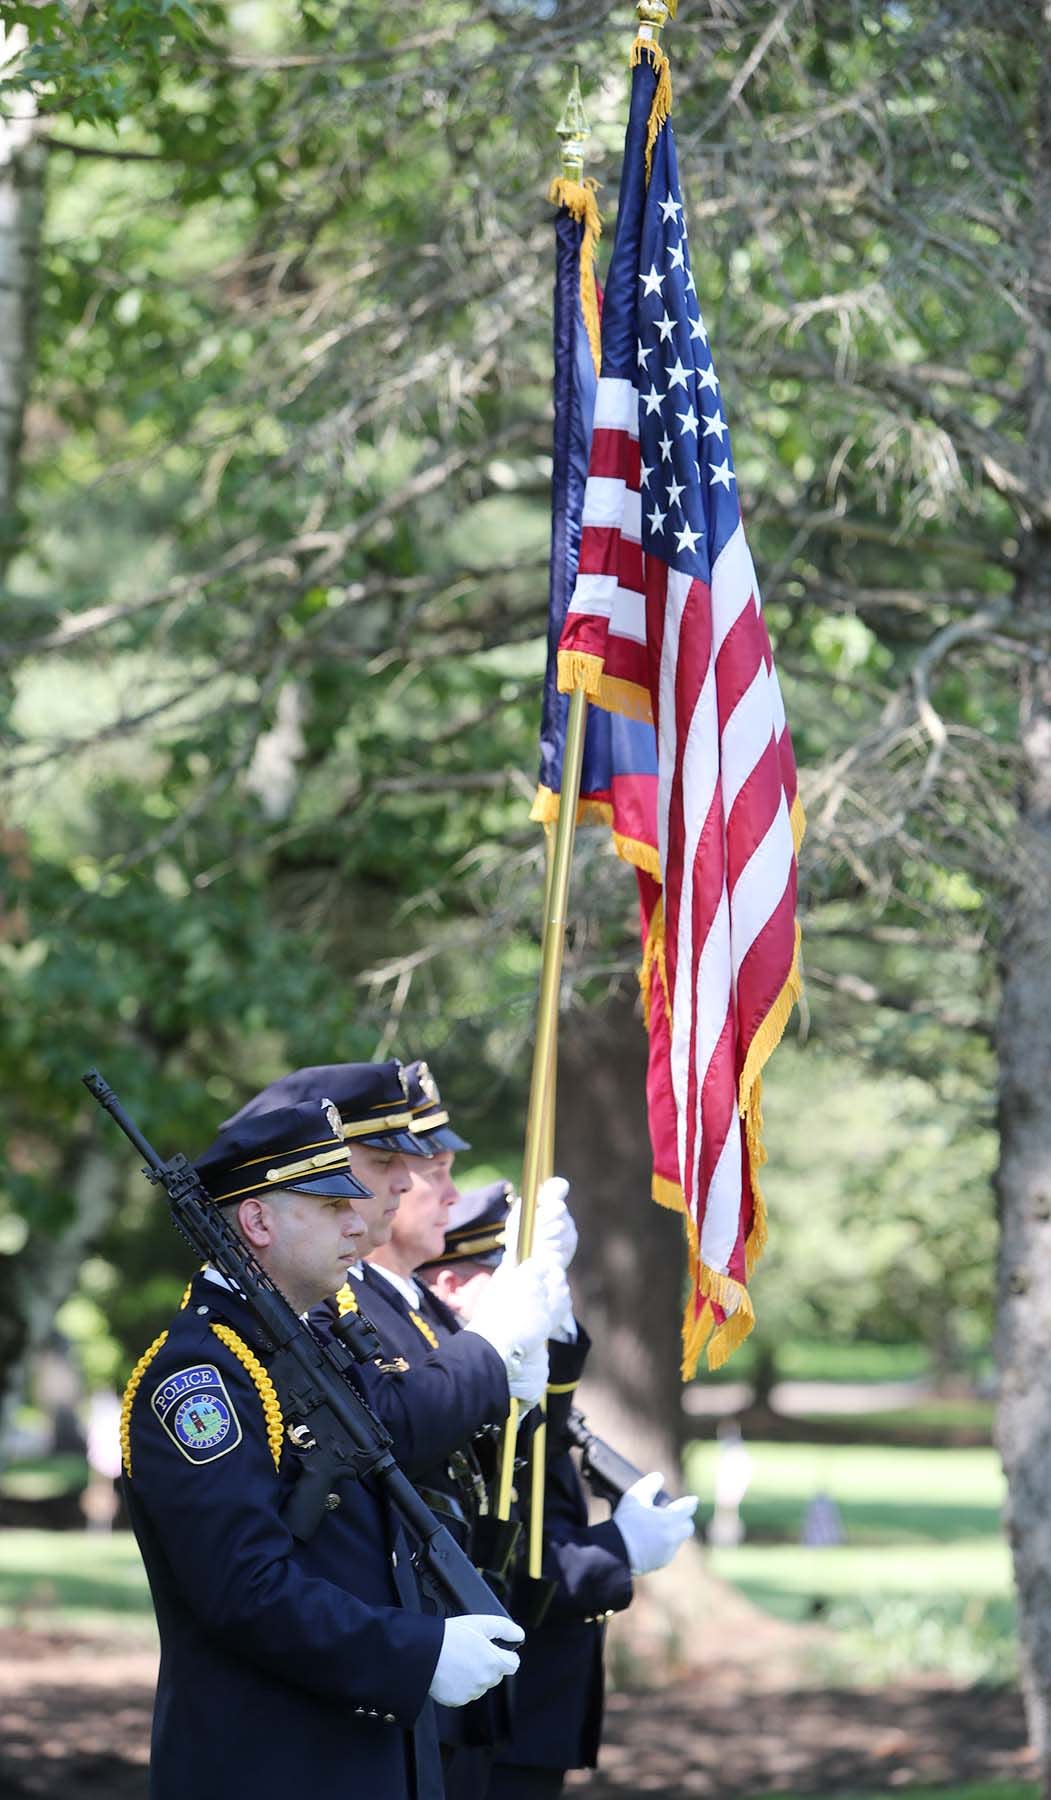 The Hudson Police Department Honor Guard was among the participants in the 2022 Hudson Memorial Day Parade.